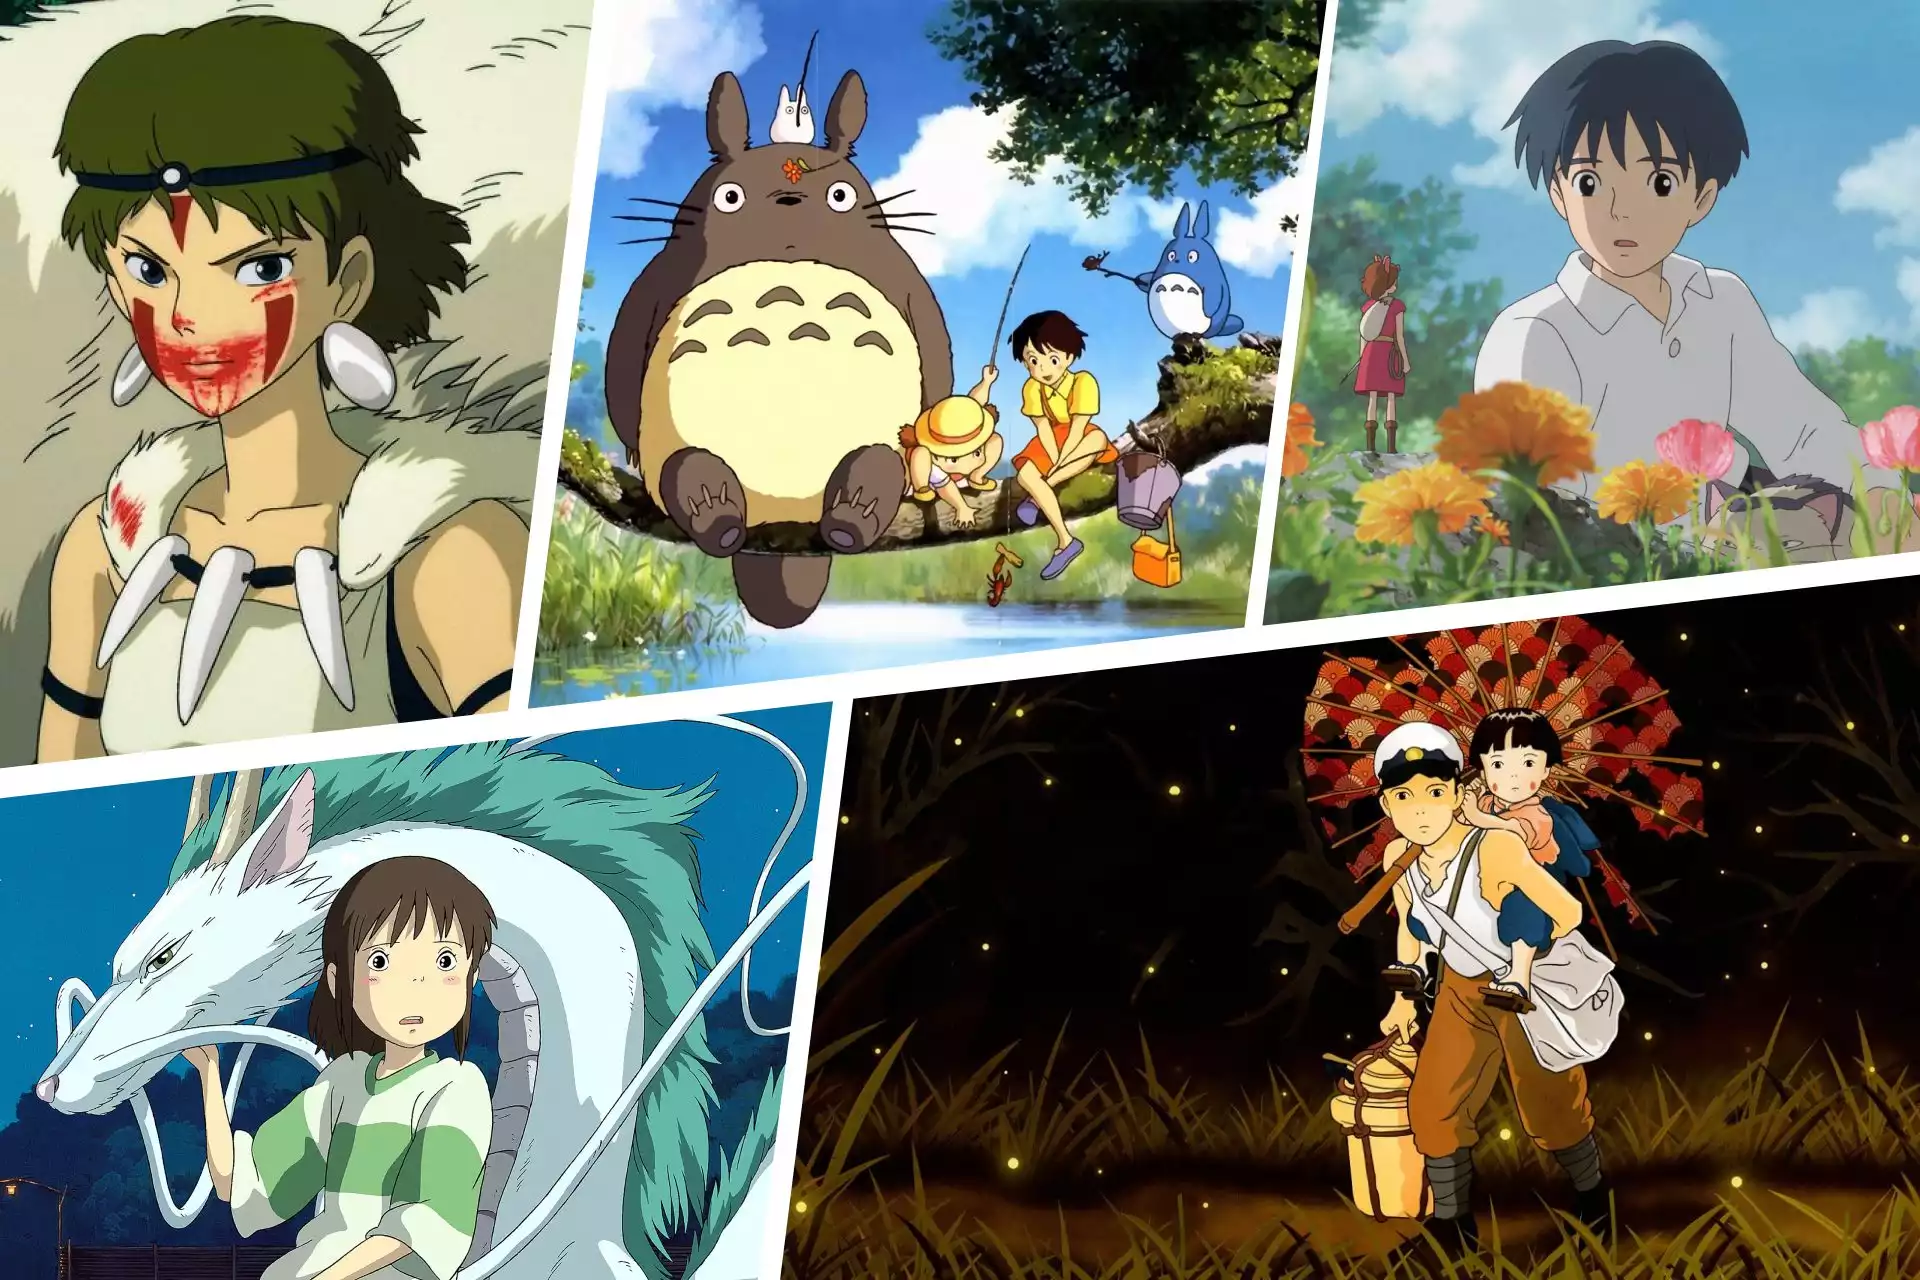 Best Miyazaki Movies Ranking The Master of Japanese Animations Films   IndieWire